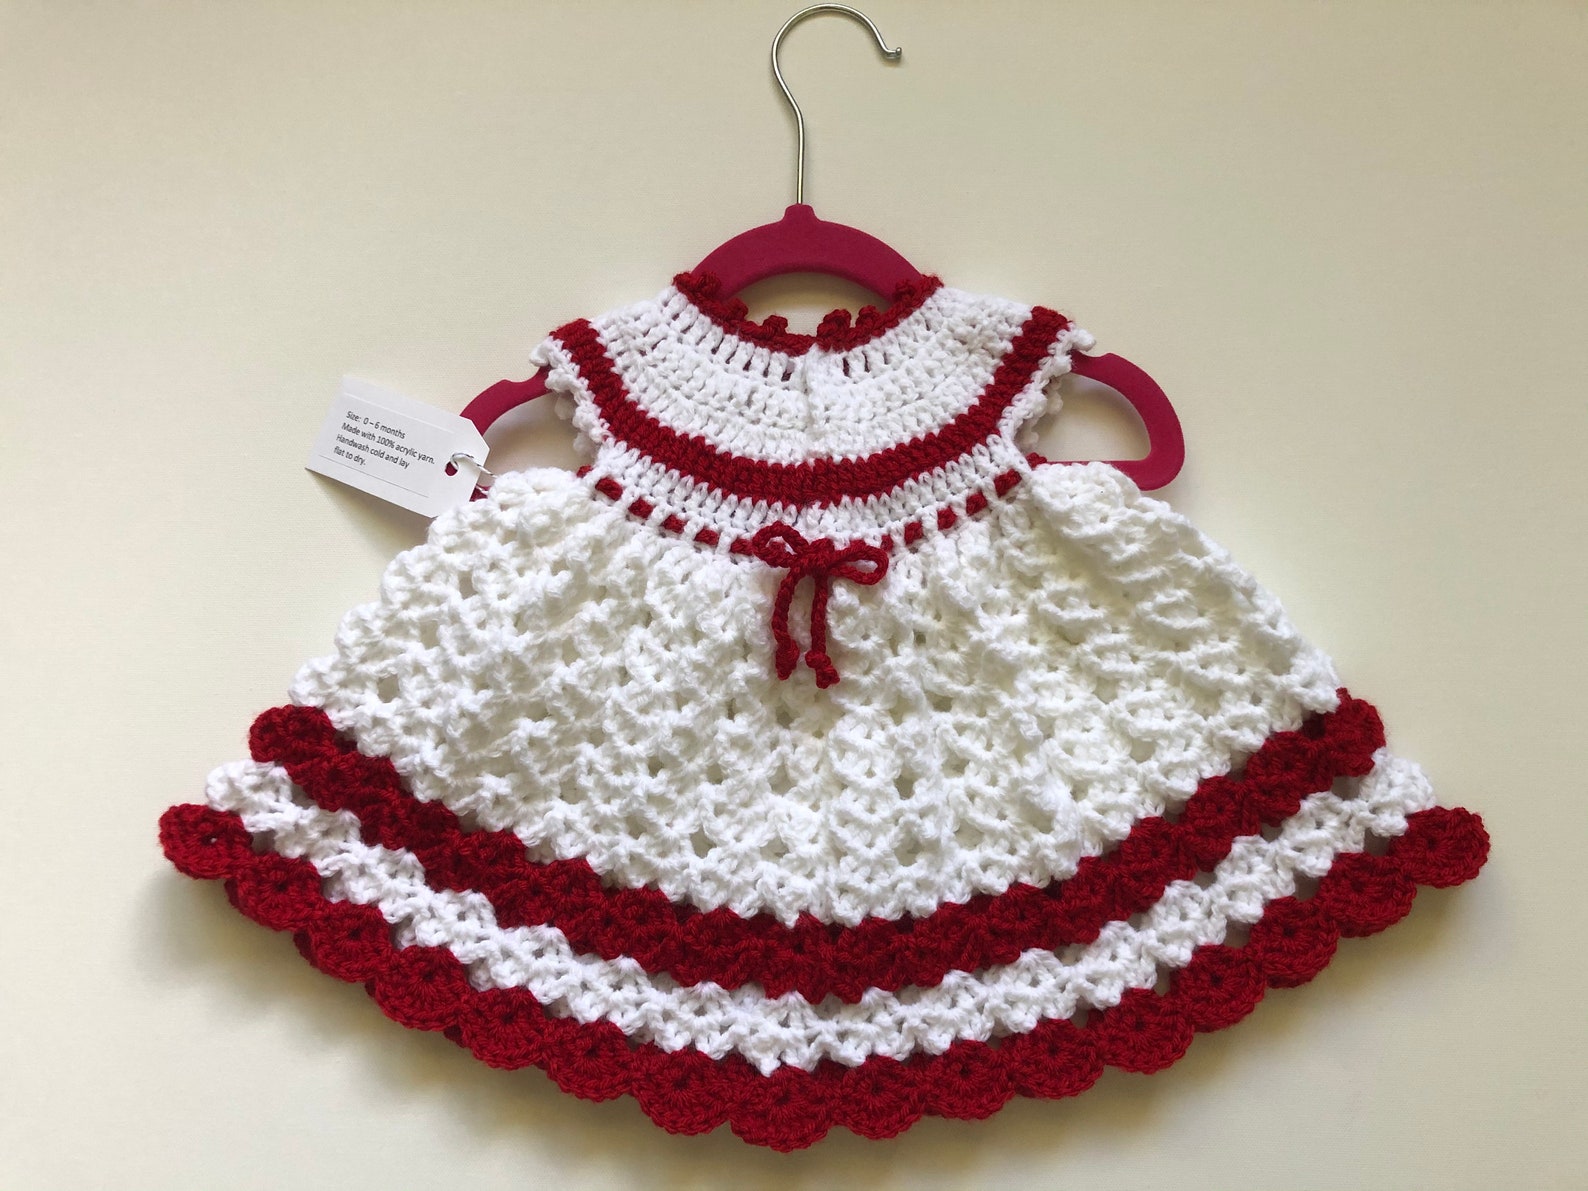 Baby Crochet Dress White and Red Crochet Baby Girl Outfit | Etsy